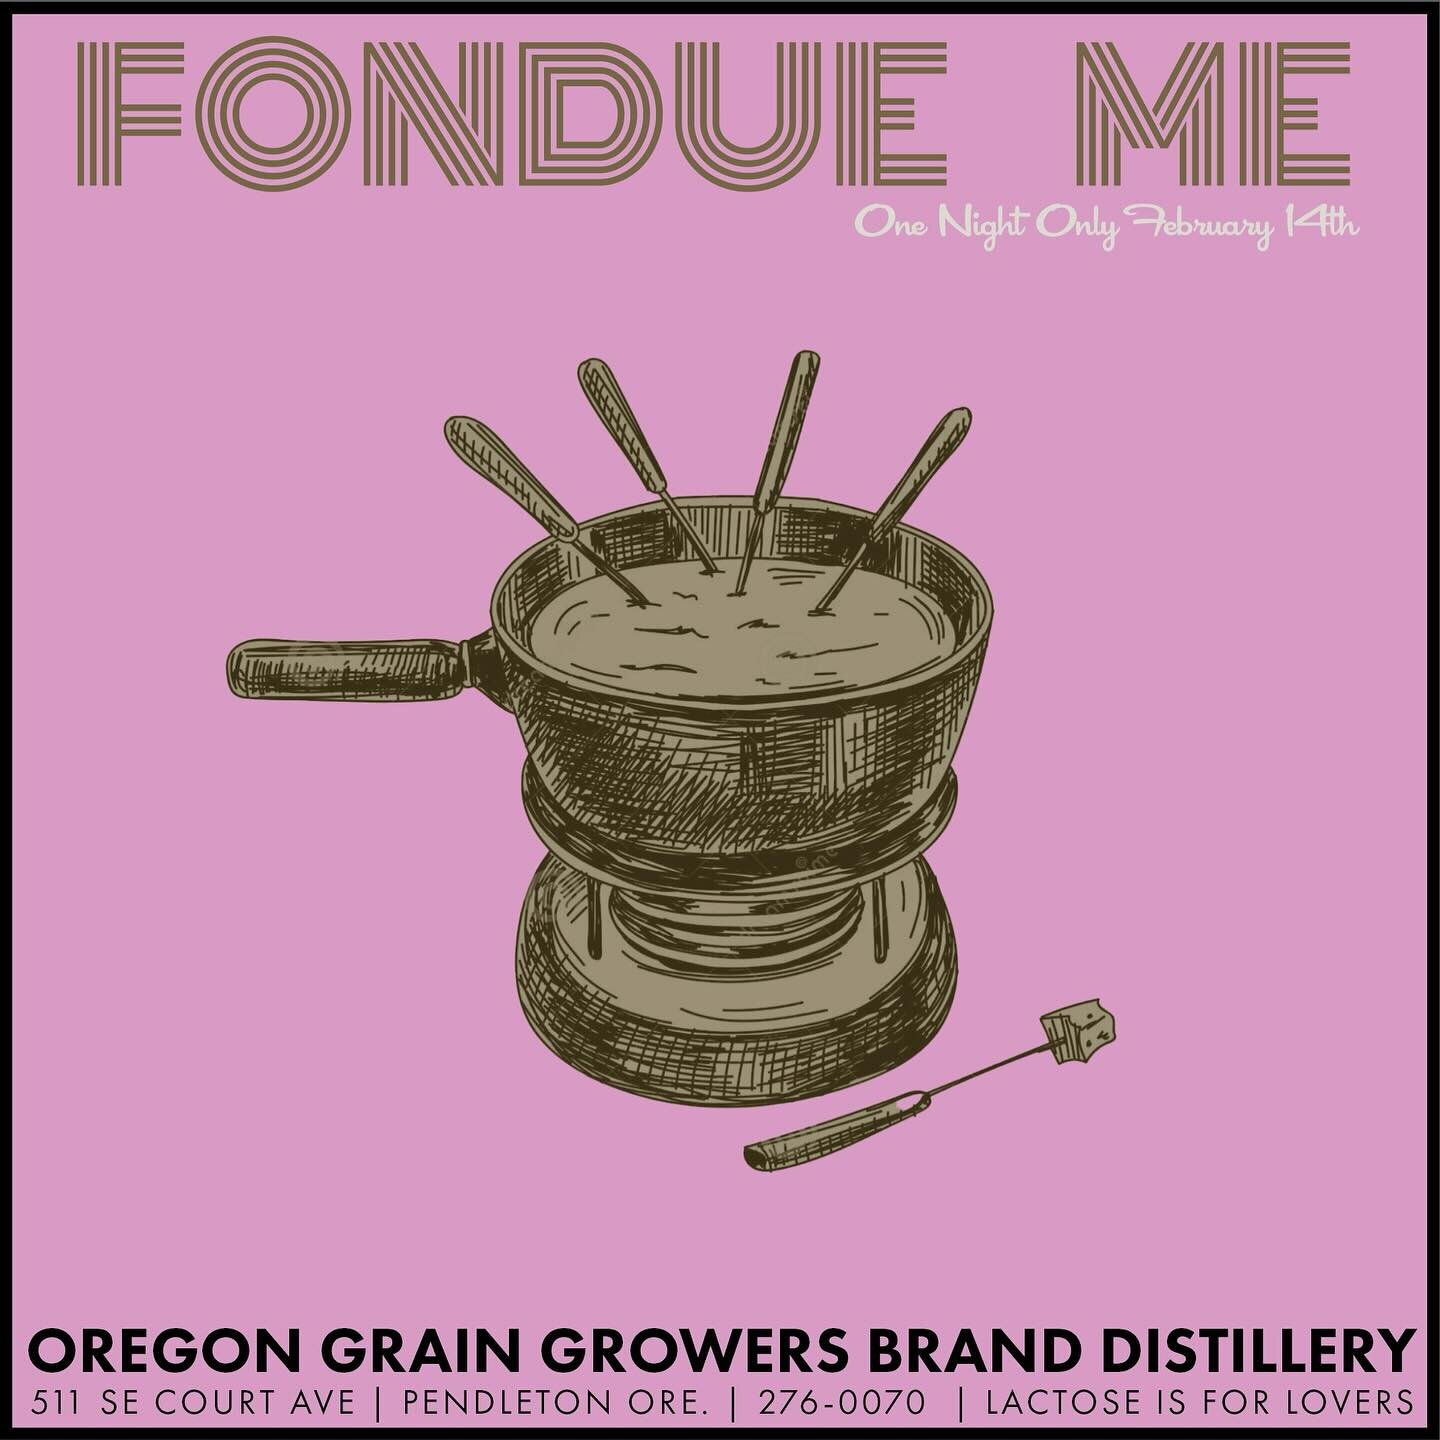 Fondue me at the distillery! Check bio for link to buy tickets to the event! #valentines #fondue #cocktails #pendletonoregon #lactosetolerant #hotcheese